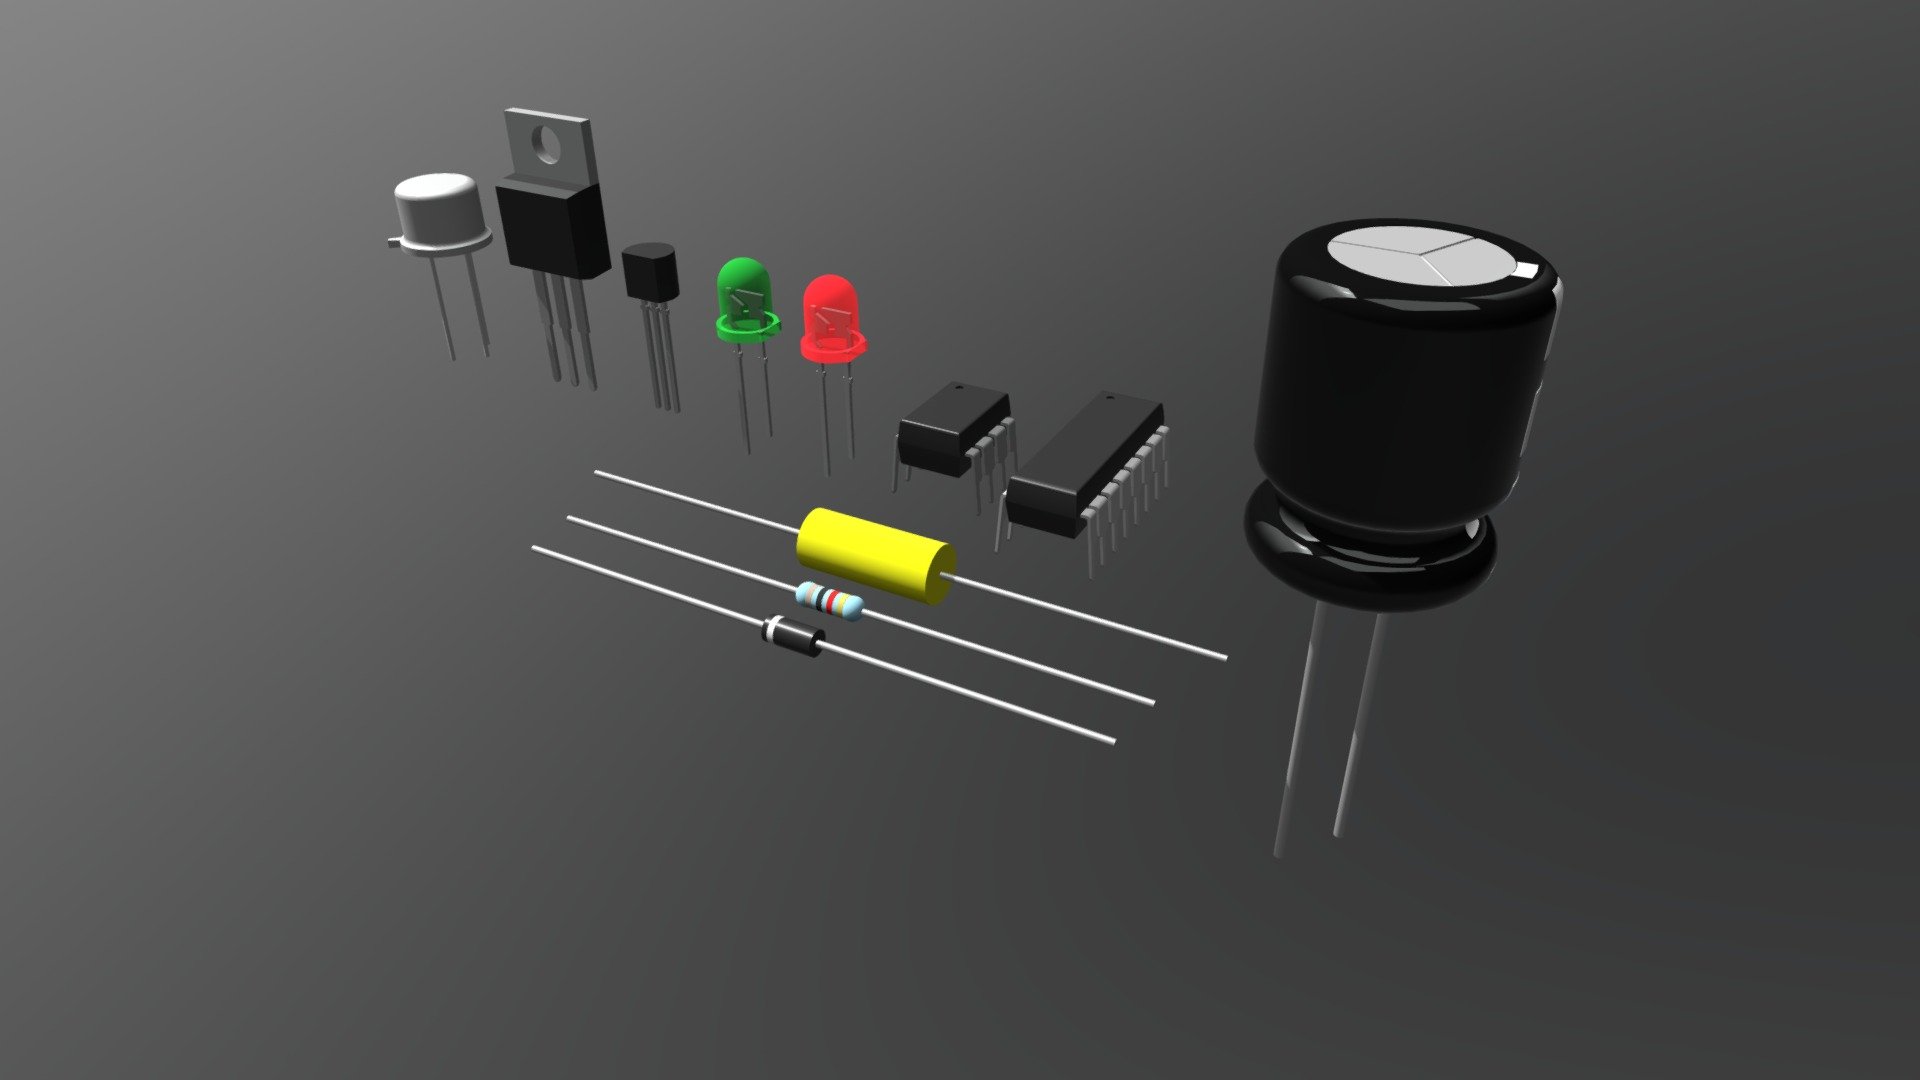 A basic set of elecronic parts.

Containing:
-resistor
-diode (DO41-Package)
-diode (green + red - 5mm - light emmitting)
-IC (DIP8-Package)
-IC (DIP16-Package) 
-Capacitor electrolytic radial
-Capacitor foil polyester axial
-Transistor (TO39-Package)
-Transistor (TO92-Package)
-Transistor (TO220-Package)

Last changes 
(- added 23.07.2019)
-IC DIP 16 added
-diode and resistor corrected clipping issue
(- added 25.07.2019)
-mkt-cap_axial added
(26.07.2019
-Transistor (TO39-Package) added
 &hellip;to be continued - Set of electronic parts - Buy Royalty Free 3D model by TYYK 3d model